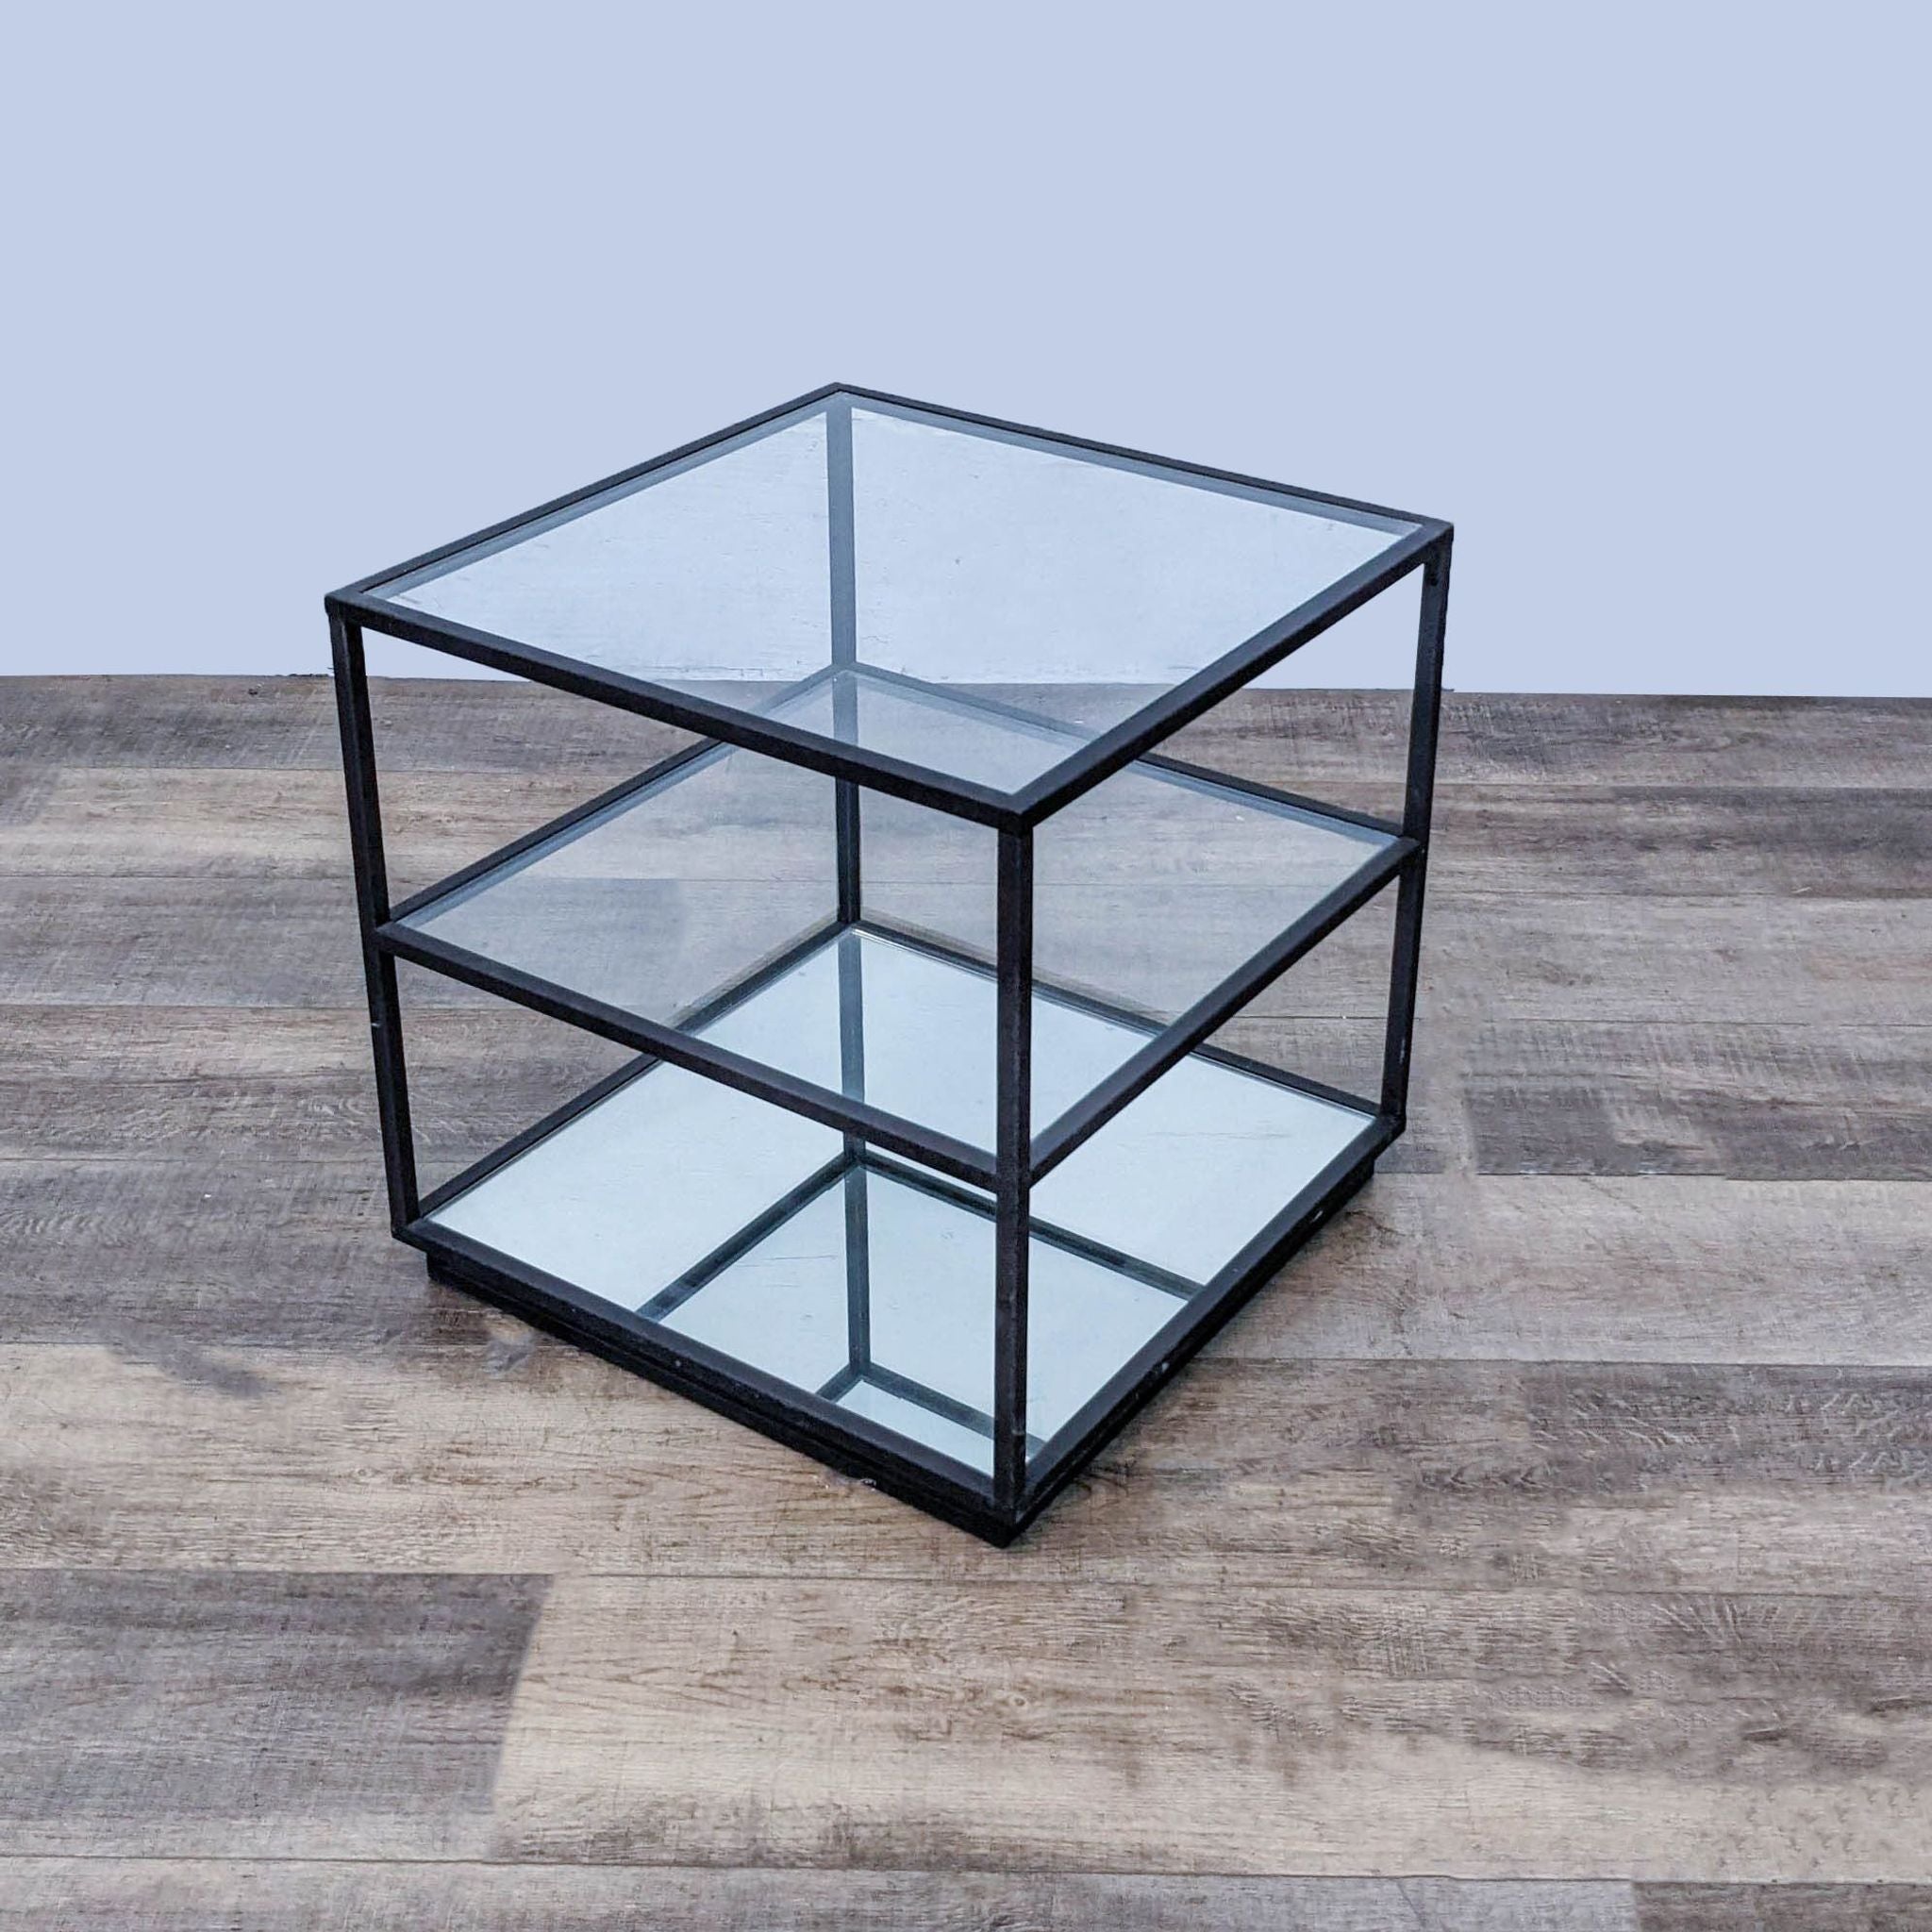 Reperch metal frame end table with glass top and two lower shelves, one mirrored, on a wooden floor.